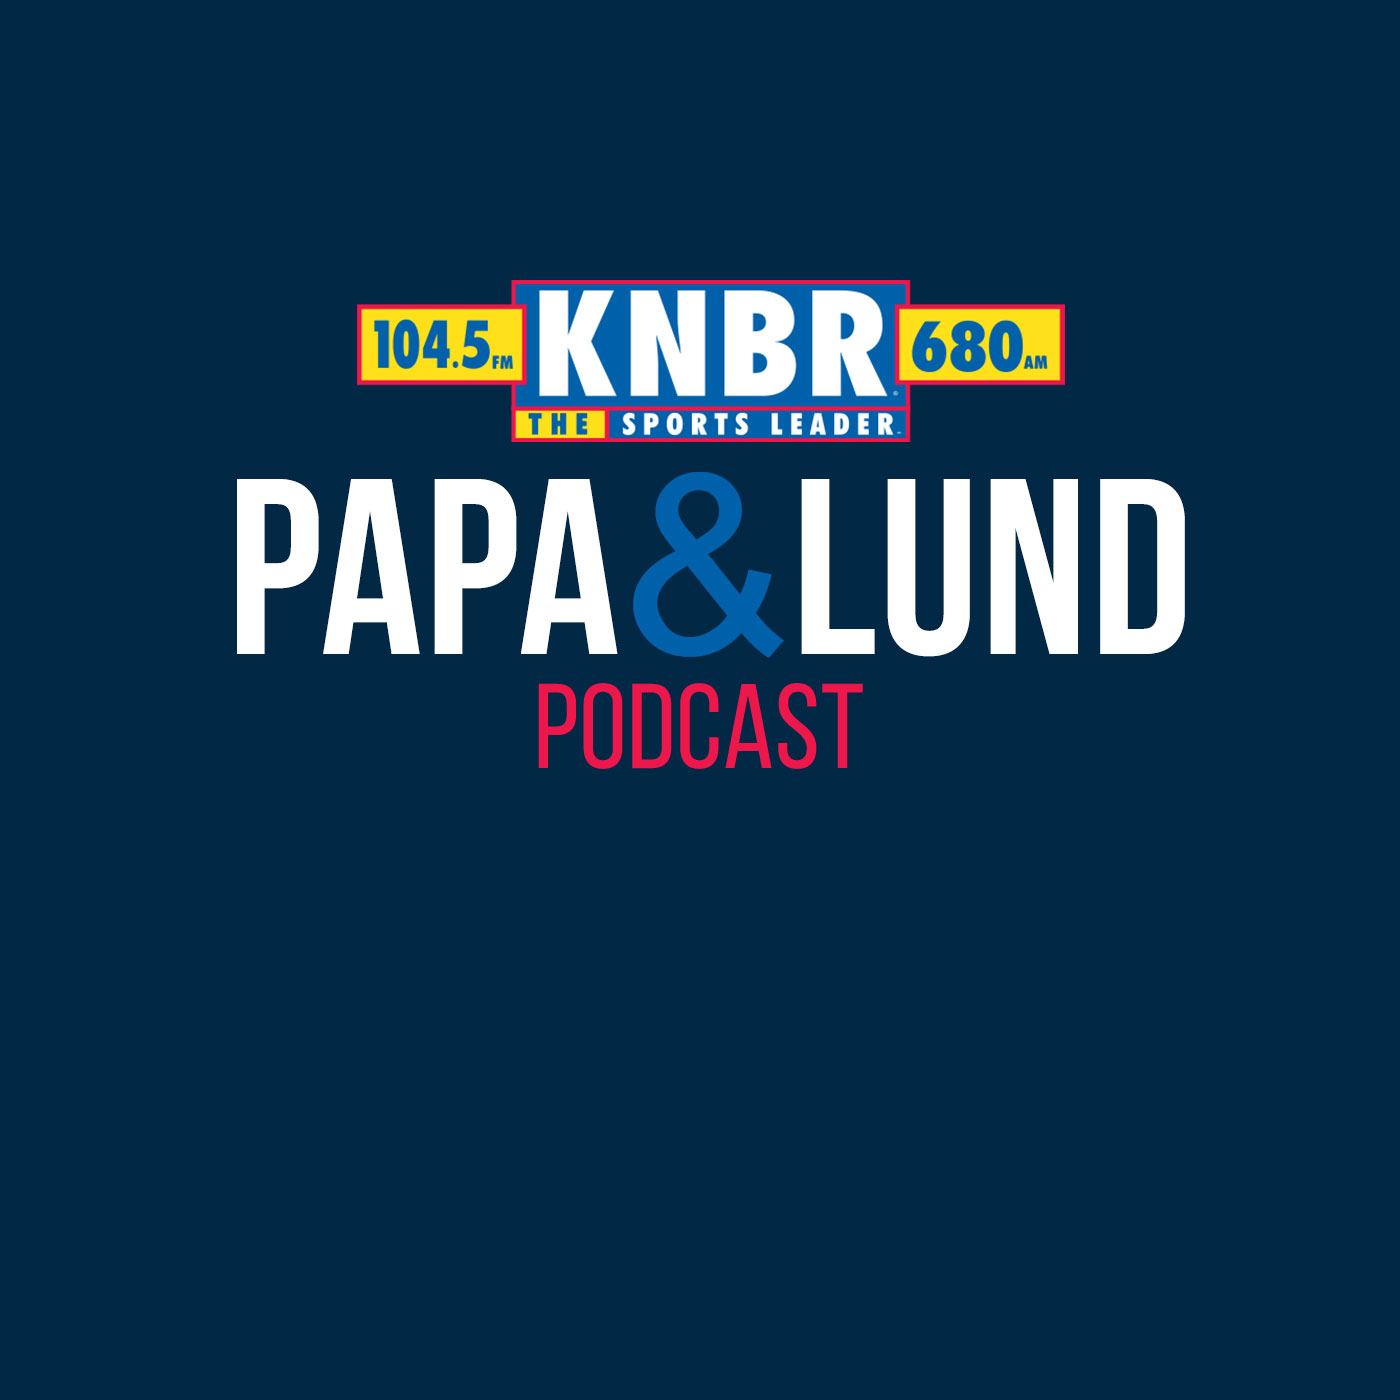 8-18 Matt Maiocco joins Papa & Lund to discuss the pecking order for the 49ers QBs and whether or not Brock Purdy will see the field on Saturday against the Broncos